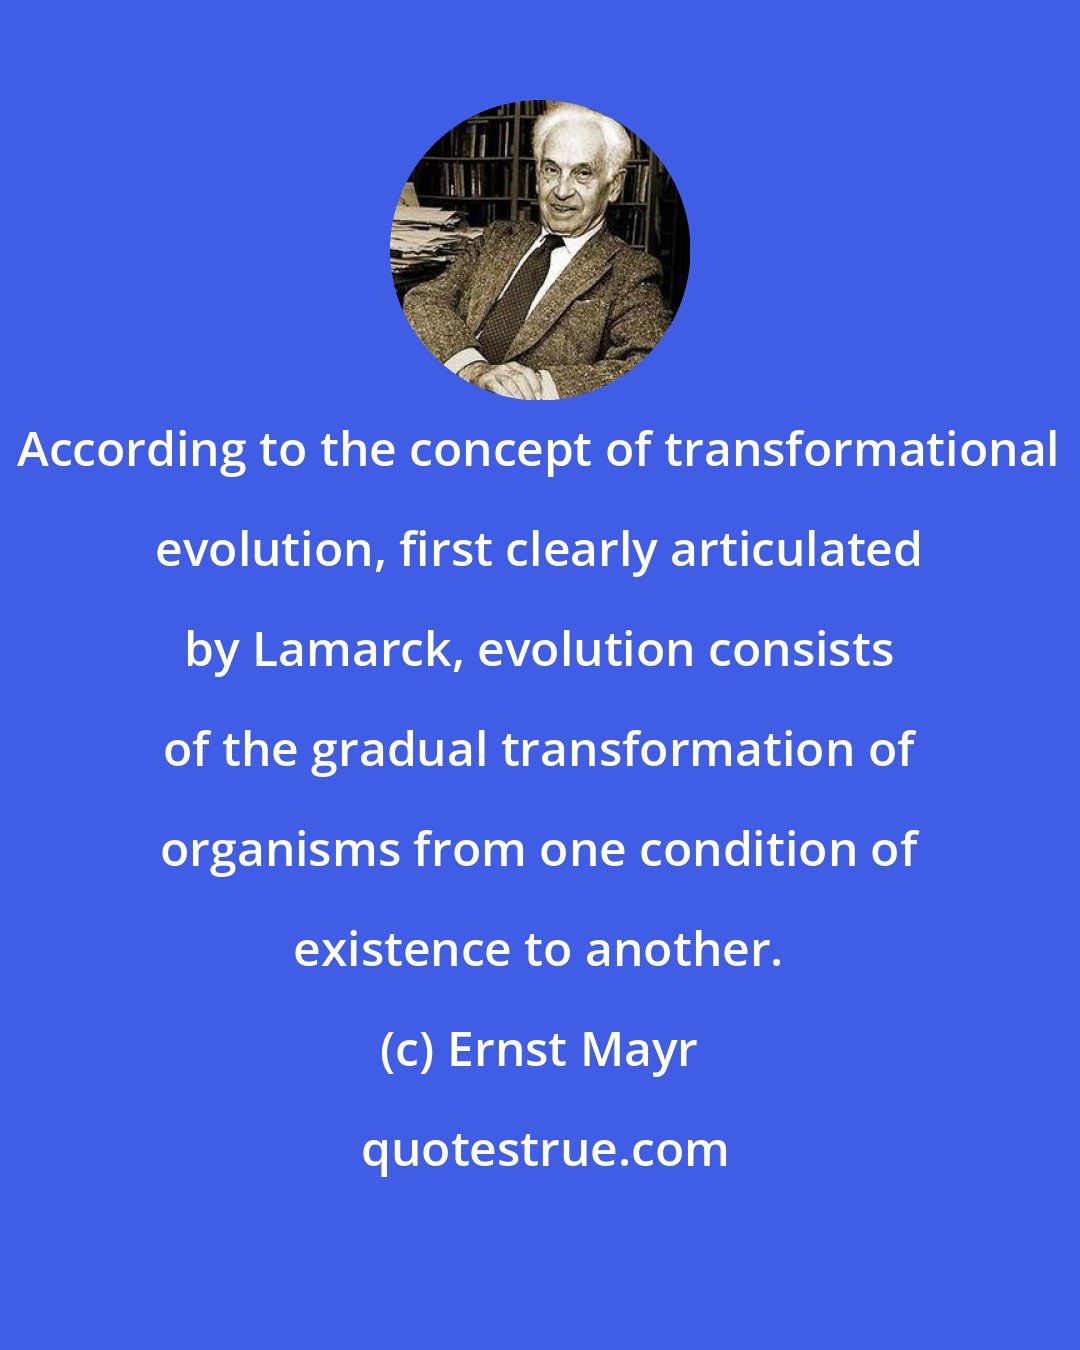 Ernst Mayr: According to the concept of transformational evolution, first clearly articulated by Lamarck, evolution consists of the gradual transformation of organisms from one condition of existence to another.